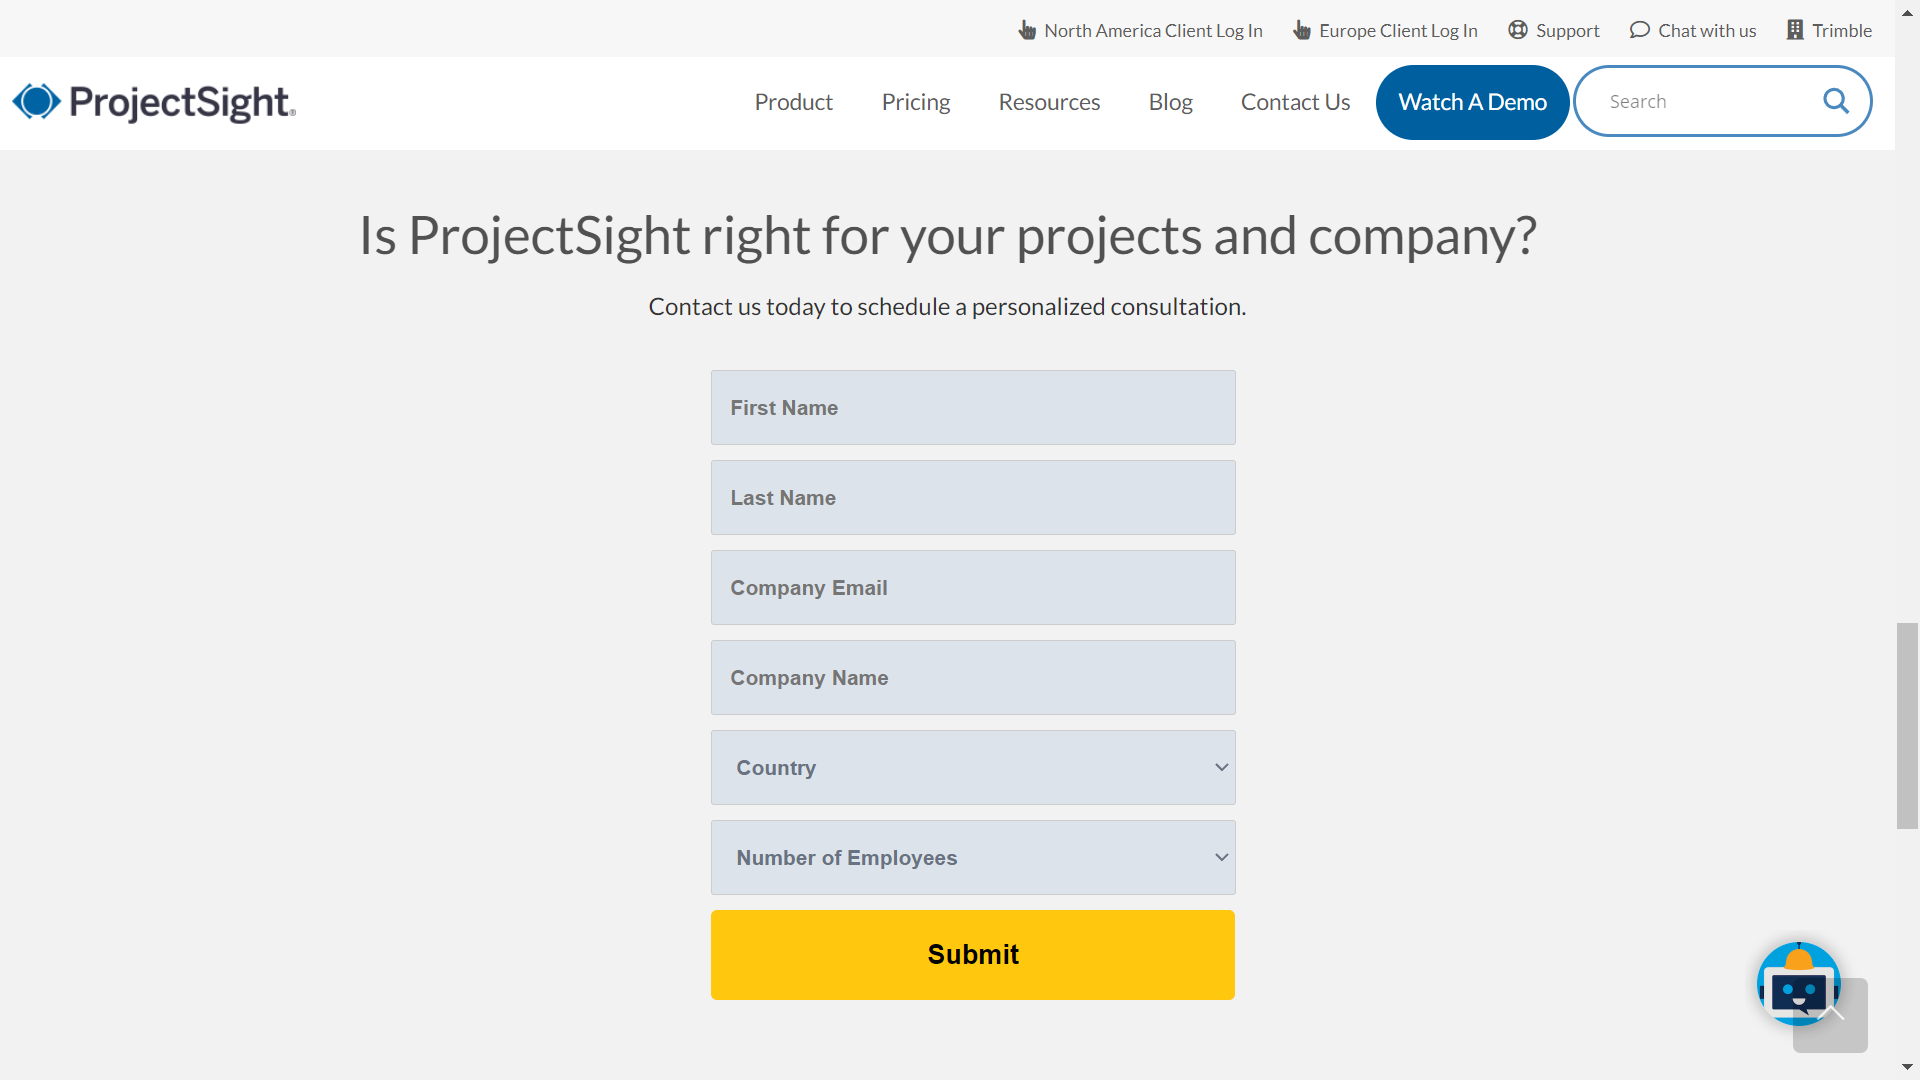 ProjectSight's pricing inquiry form as of 2023